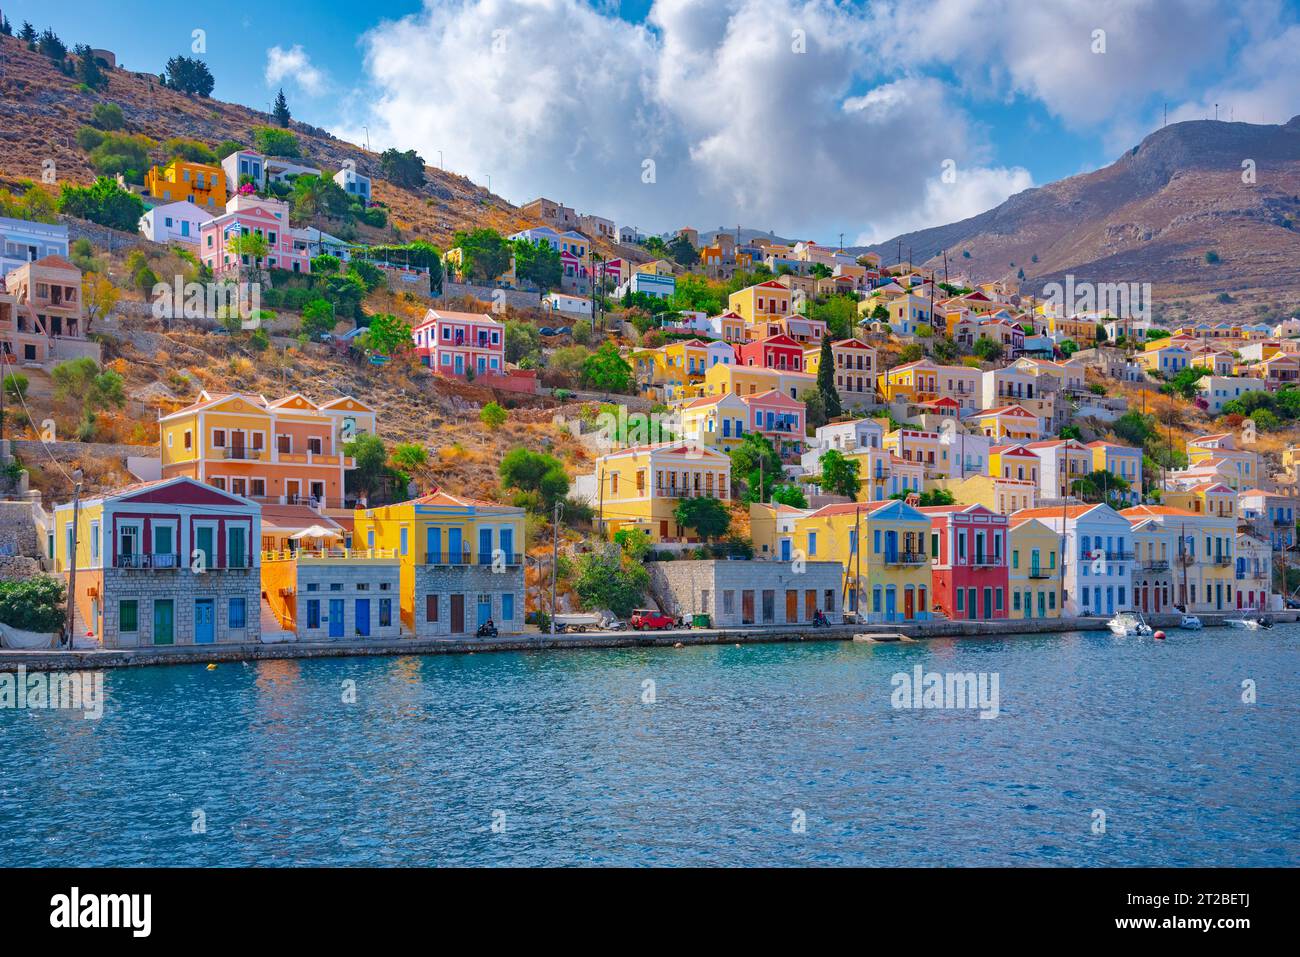 Colorful houses village in Symi island, Dodecanese islands, Greece. Stock Photo